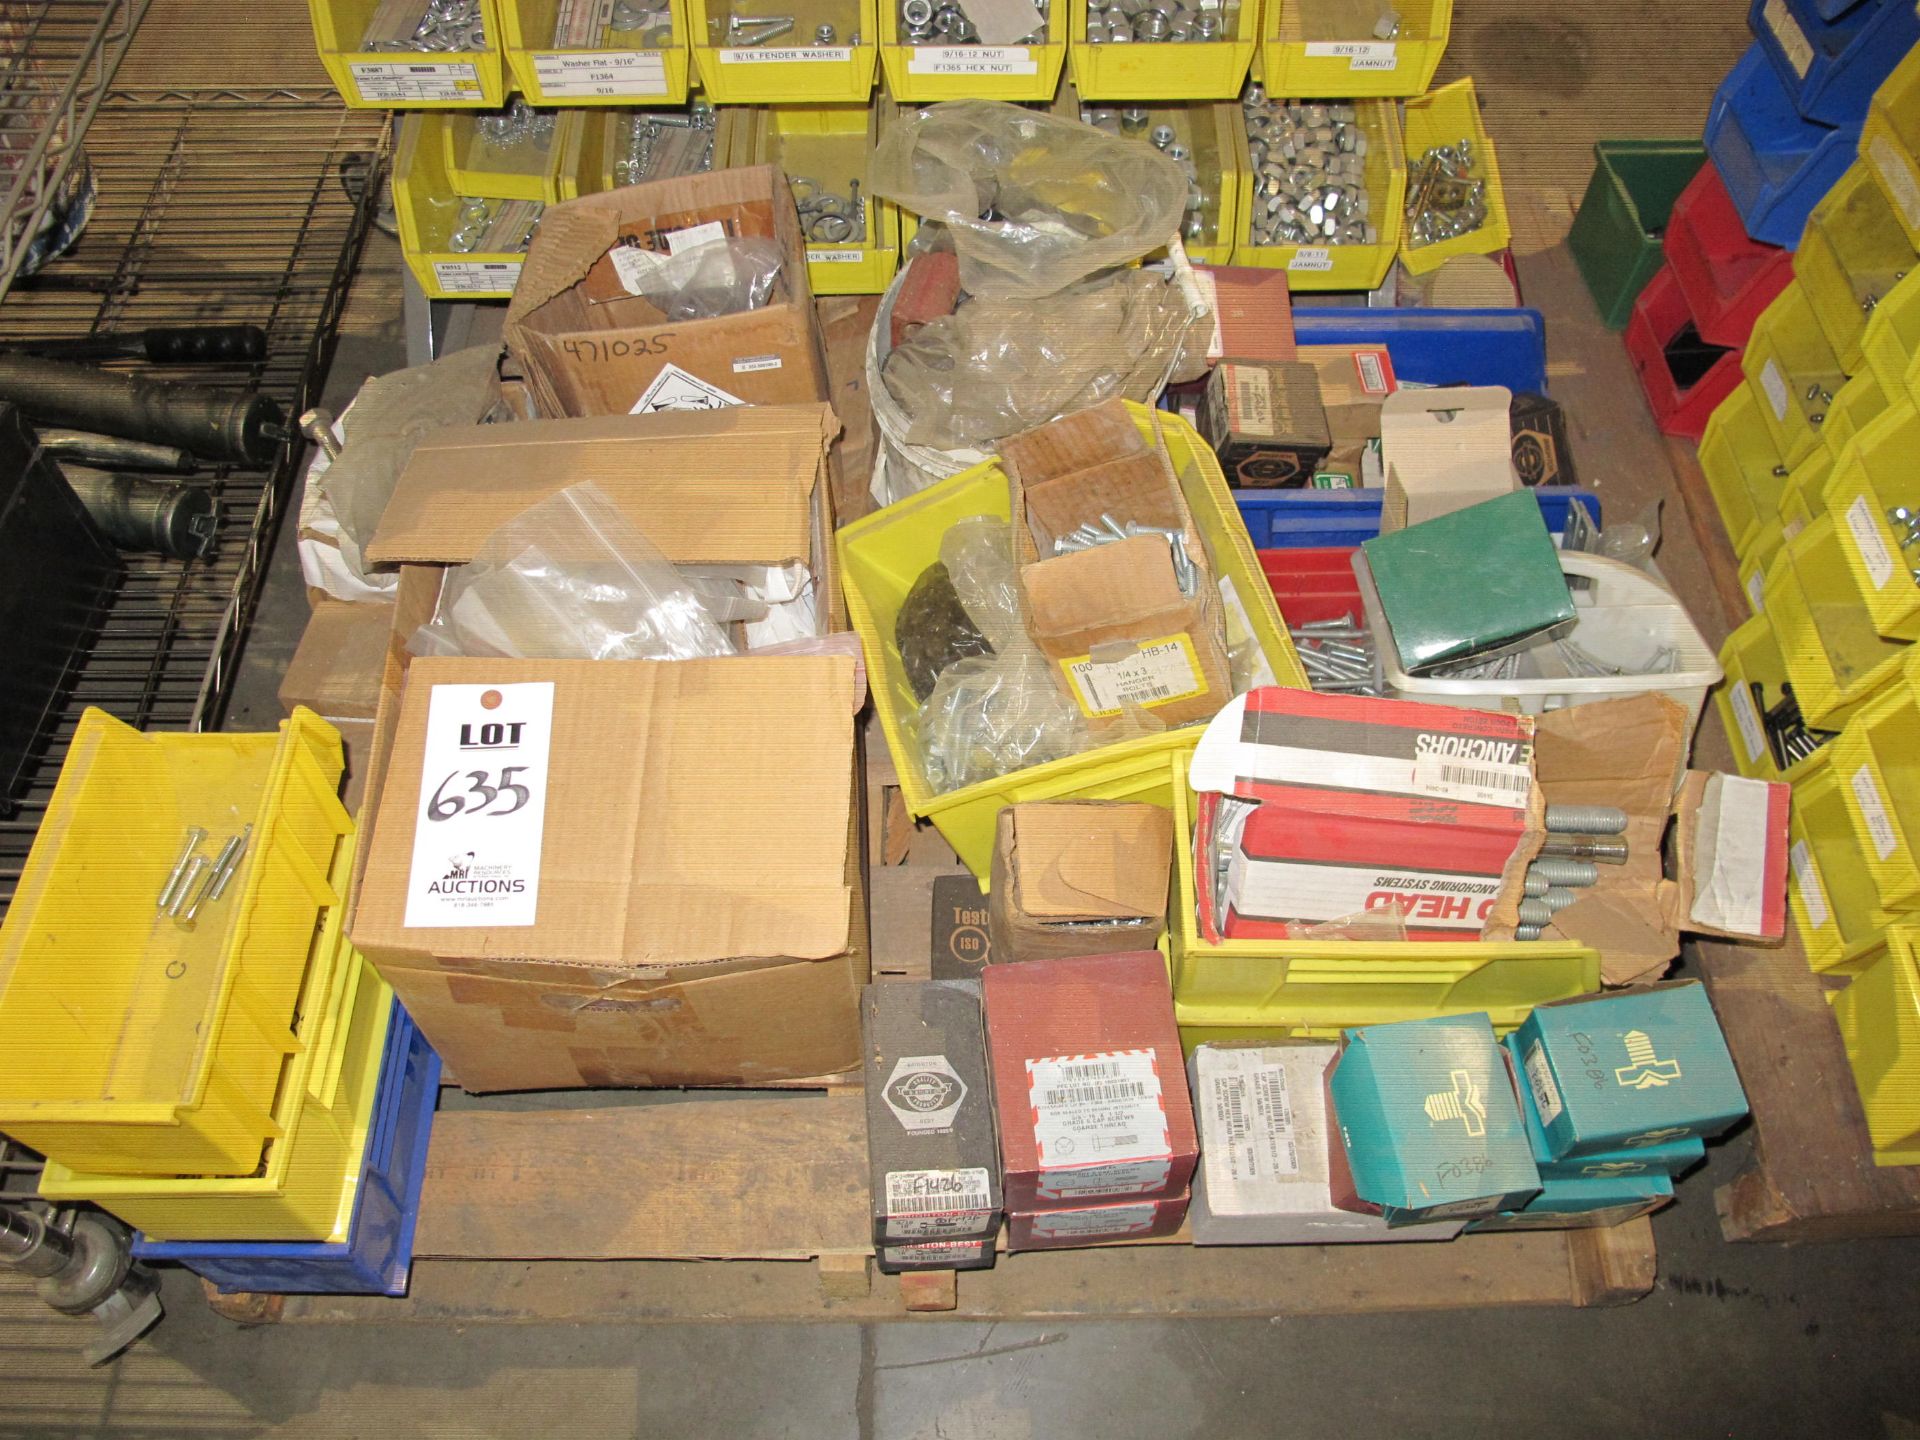 PLASTIC INVENTORY BINS WITH MISC. HARDWARE: WASHERS, NUTS, BOLTS - Image 2 of 2